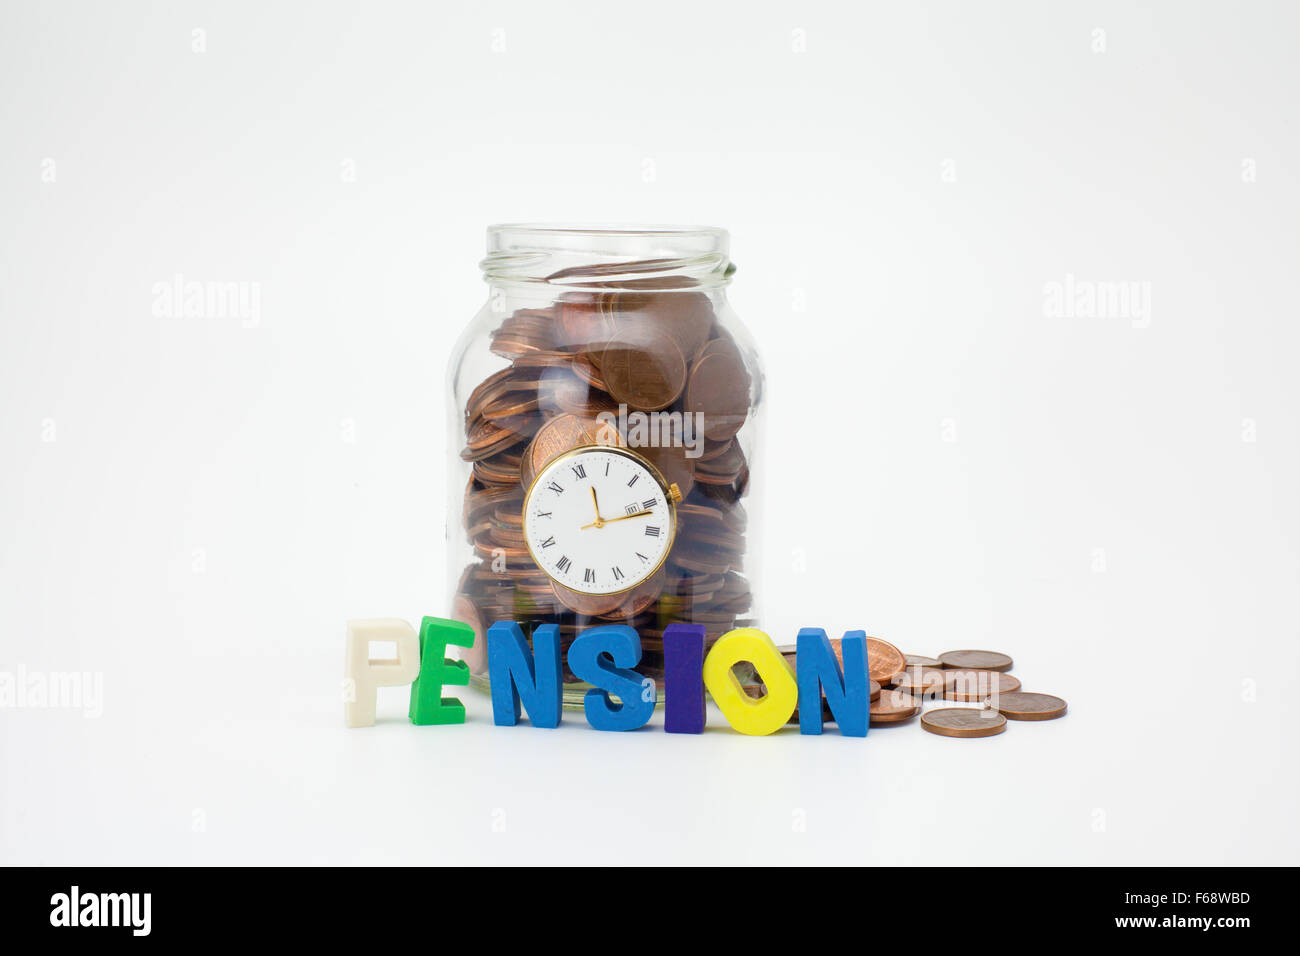 Pension coins in a glass jar with text and clock Stock Photo